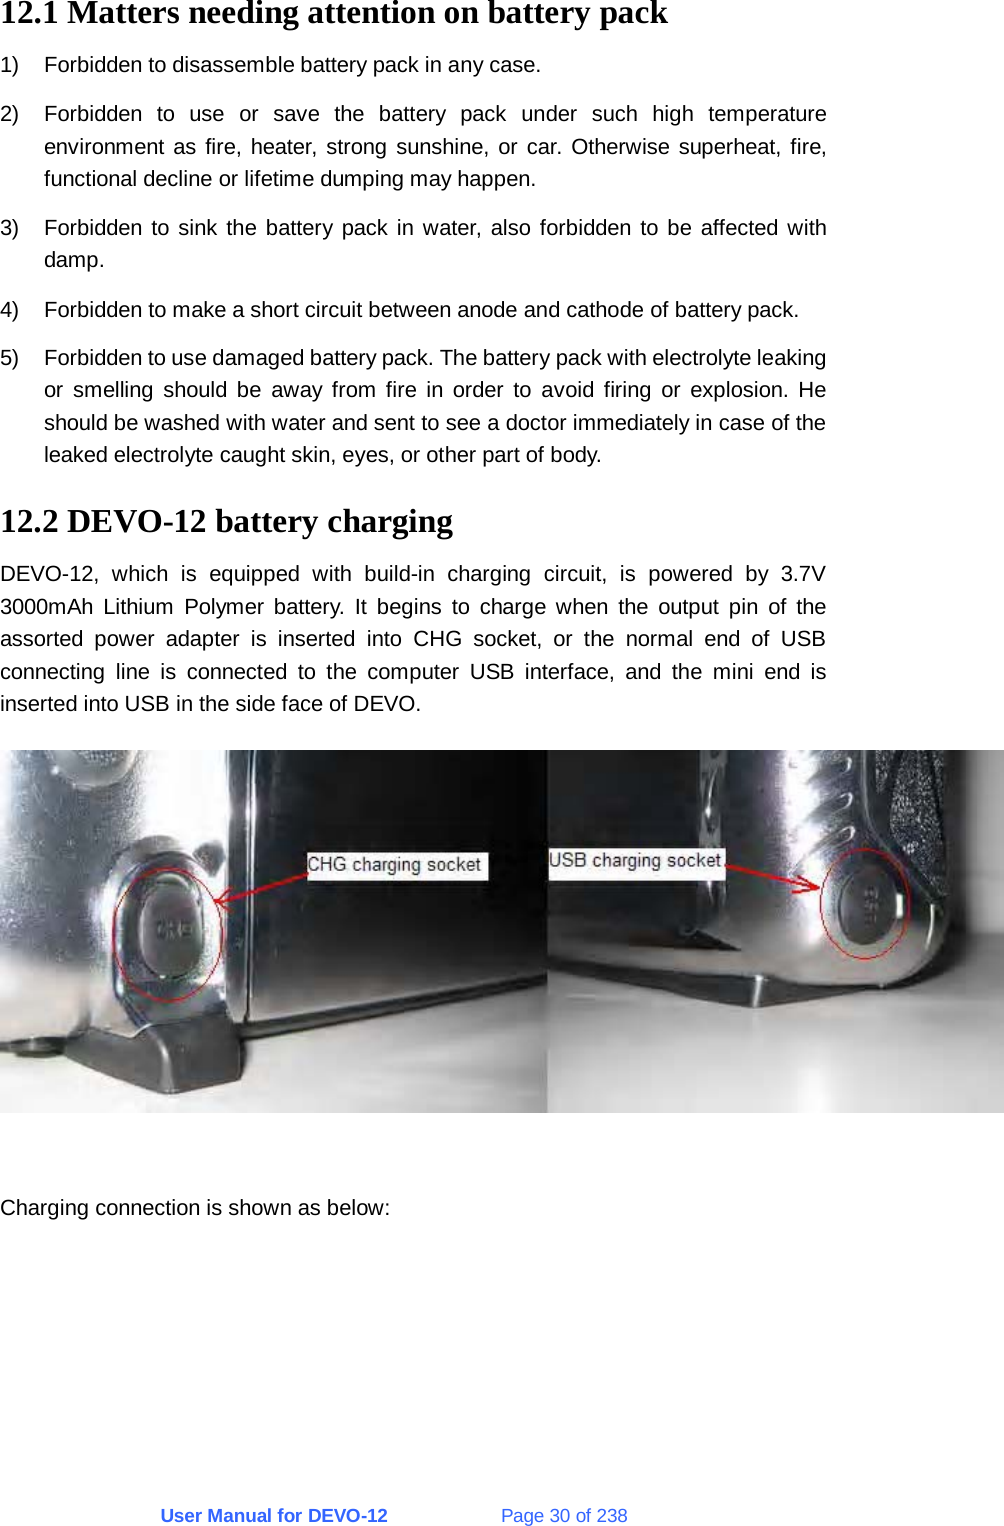 User Manual for DEVO-12             Page 30 of 238  12.1 Matters needing attention on battery pack 1)  Forbidden to disassemble battery pack in any case. 2)  Forbidden to use or save the battery pack under such high temperature environment as fire, heater, strong sunshine, or car. Otherwise superheat, fire, functional decline or lifetime dumping may happen. 3)  Forbidden to sink the battery pack in water, also forbidden to be affected with damp. 4)  Forbidden to make a short circuit between anode and cathode of battery pack. 5)  Forbidden to use damaged battery pack. The battery pack with electrolyte leaking or smelling should be away from fire in order to avoid firing or explosion. He should be washed with water and sent to see a doctor immediately in case of the leaked electrolyte caught skin, eyes, or other part of body. 12.2 DEVO-12 battery charging DEVO-12, which is equipped with build-in charging circuit, is powered by 3.7V 3000mAh Lithium Polymer battery. It begins to charge when the output pin of the assorted power adapter is inserted into CHG socket, or the normal end of USB connecting line is connected to the computer USB interface, and the mini end is inserted into USB in the side face of DEVO.   Charging connection is shown as below: 